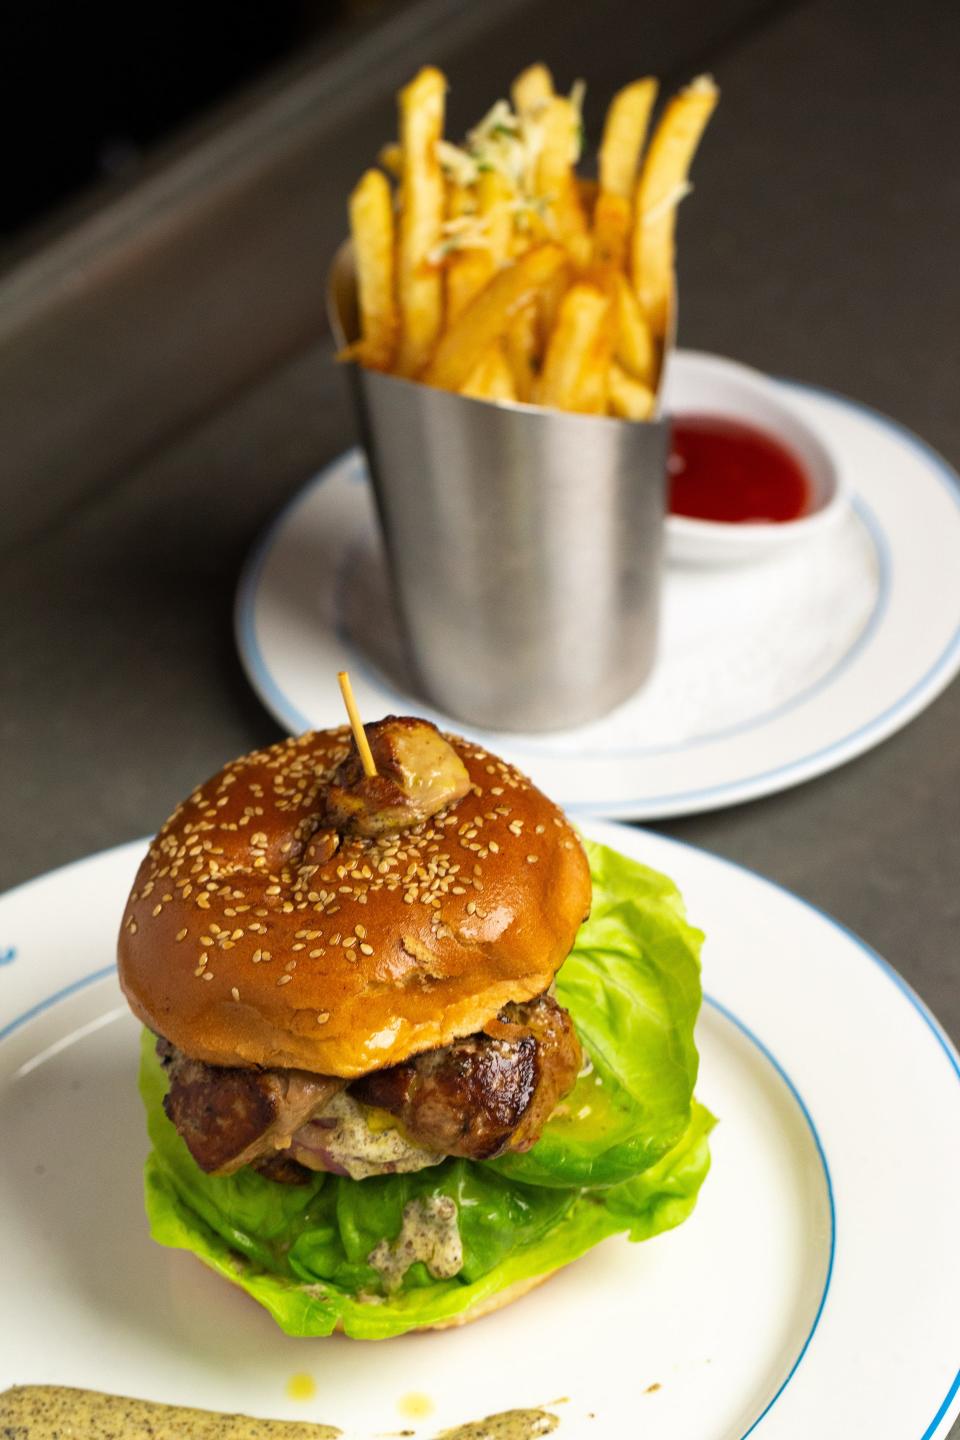 A Black Angus cheeseburger is among the entrees offered on La Goulue's new lunch menu.